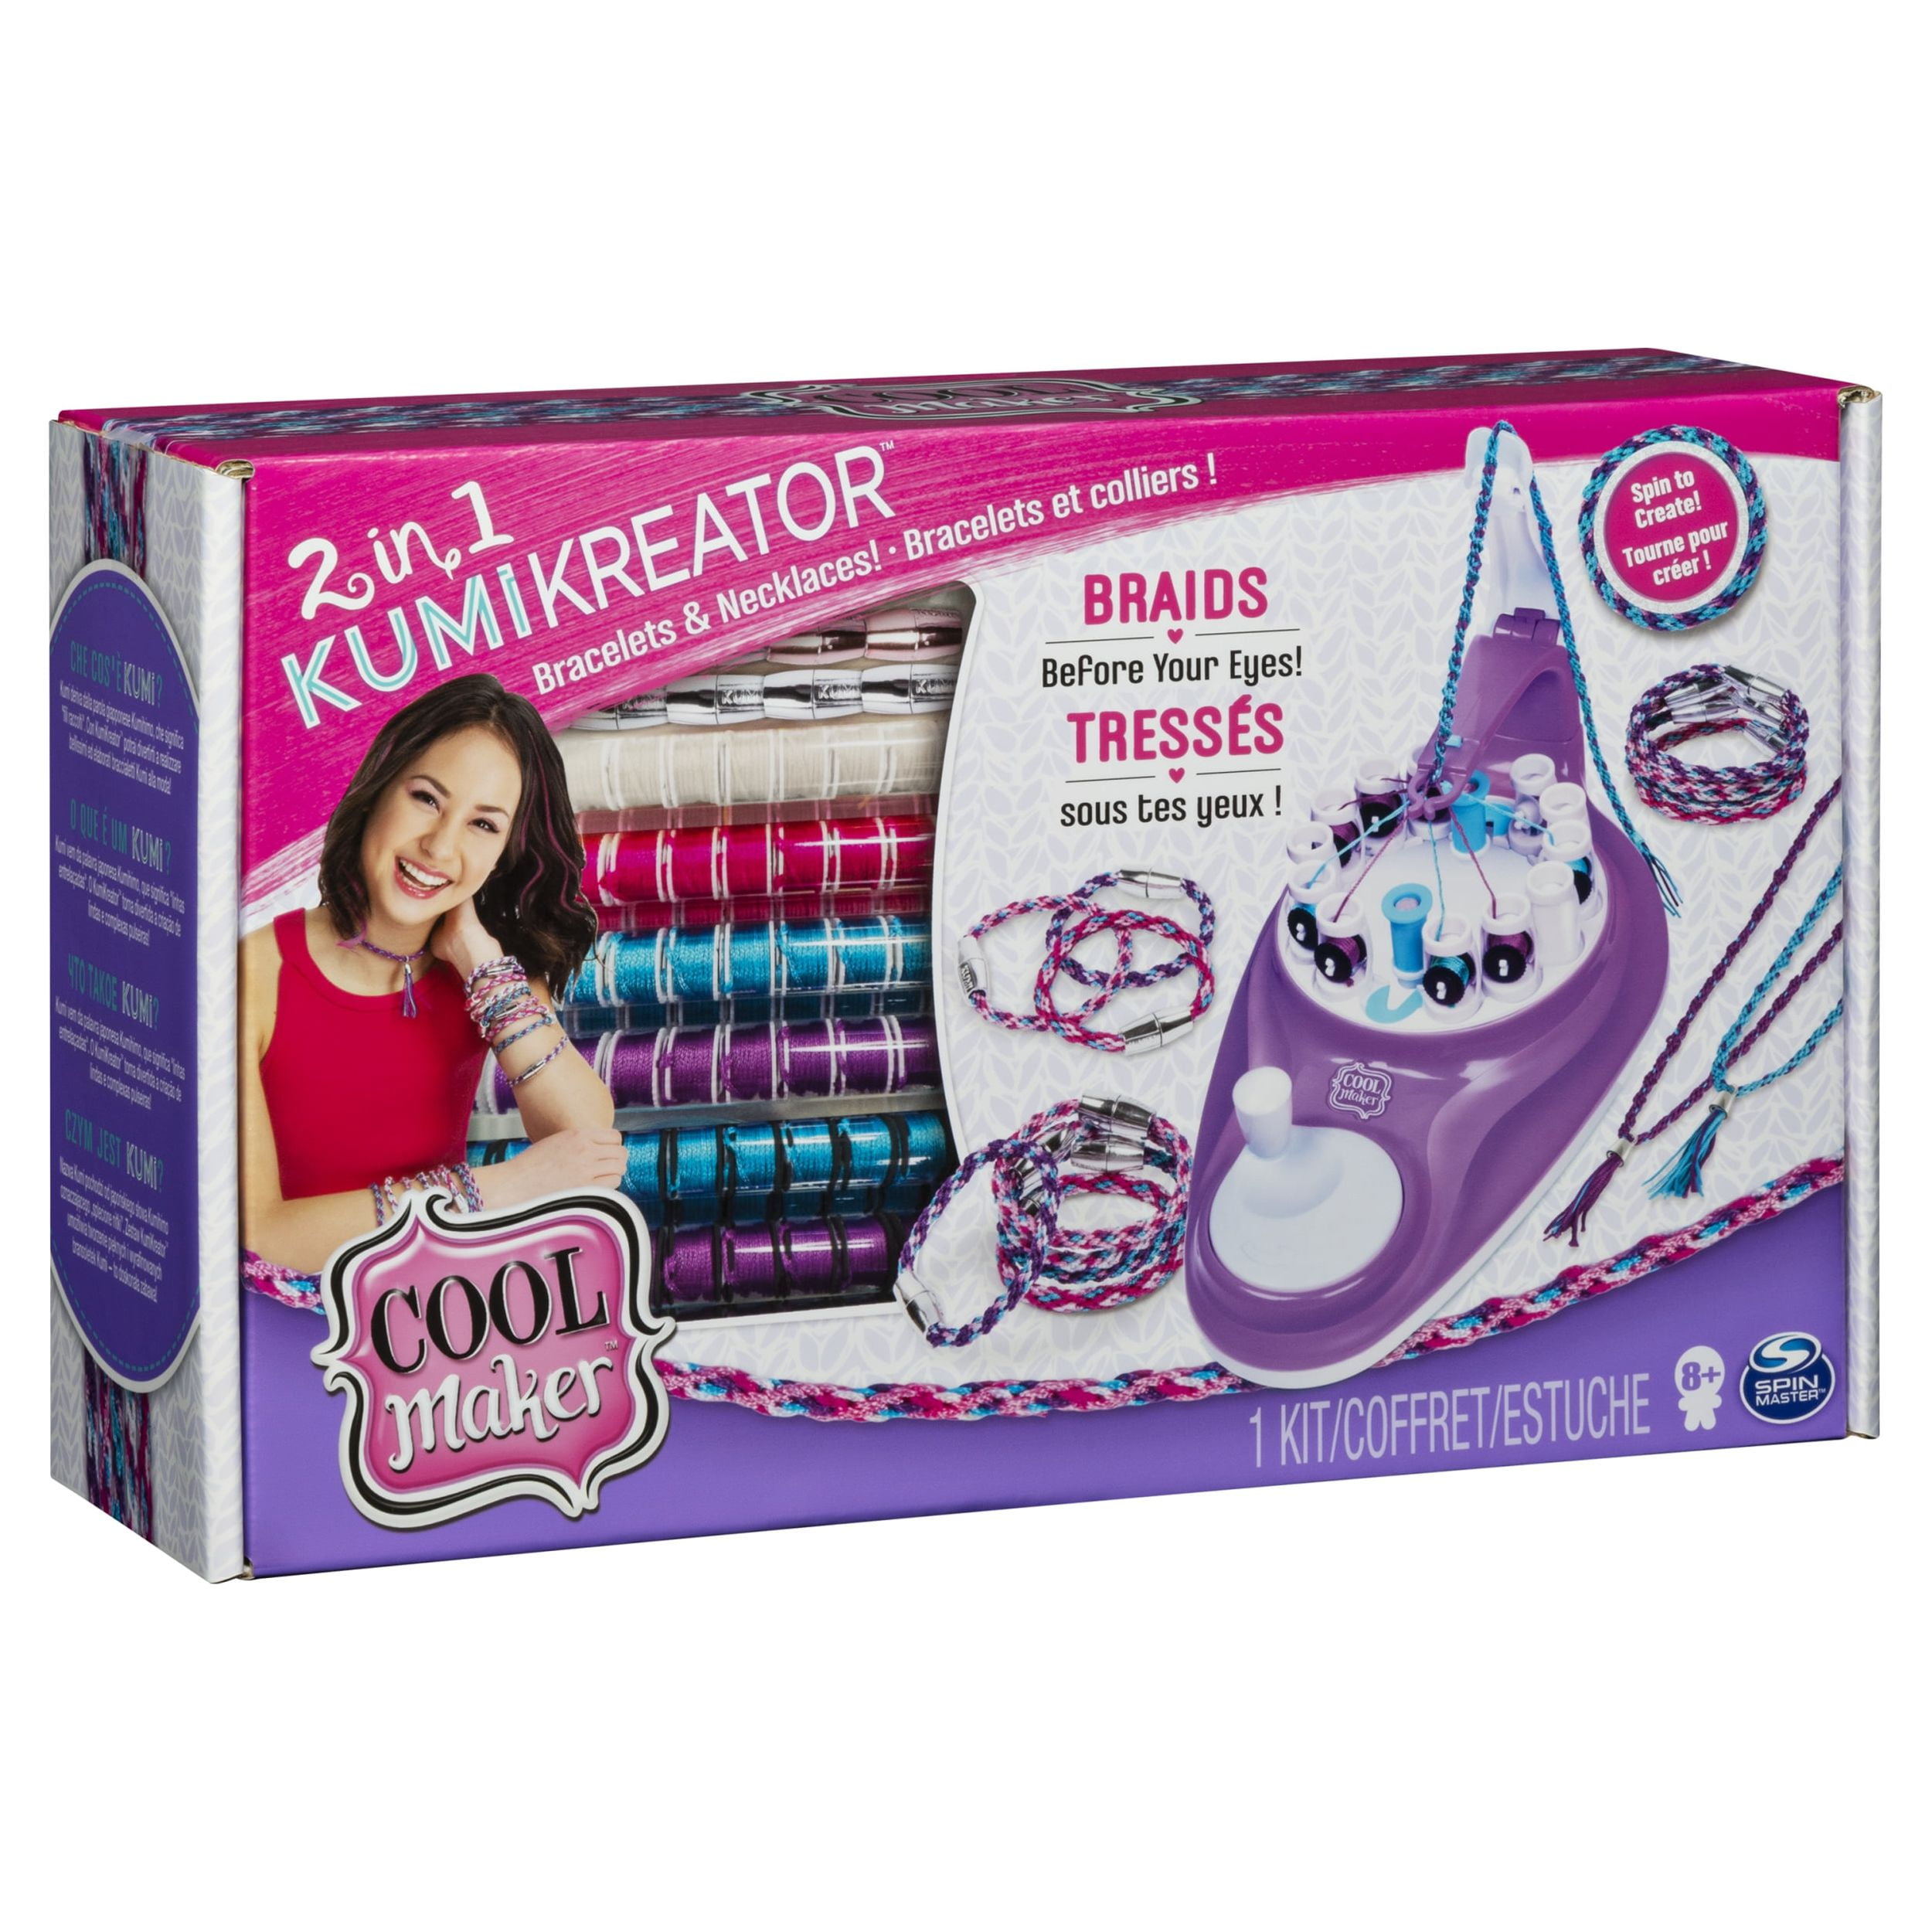 Toys & Games Cool MAKER Spin Master Makeup & Jewelry Sets